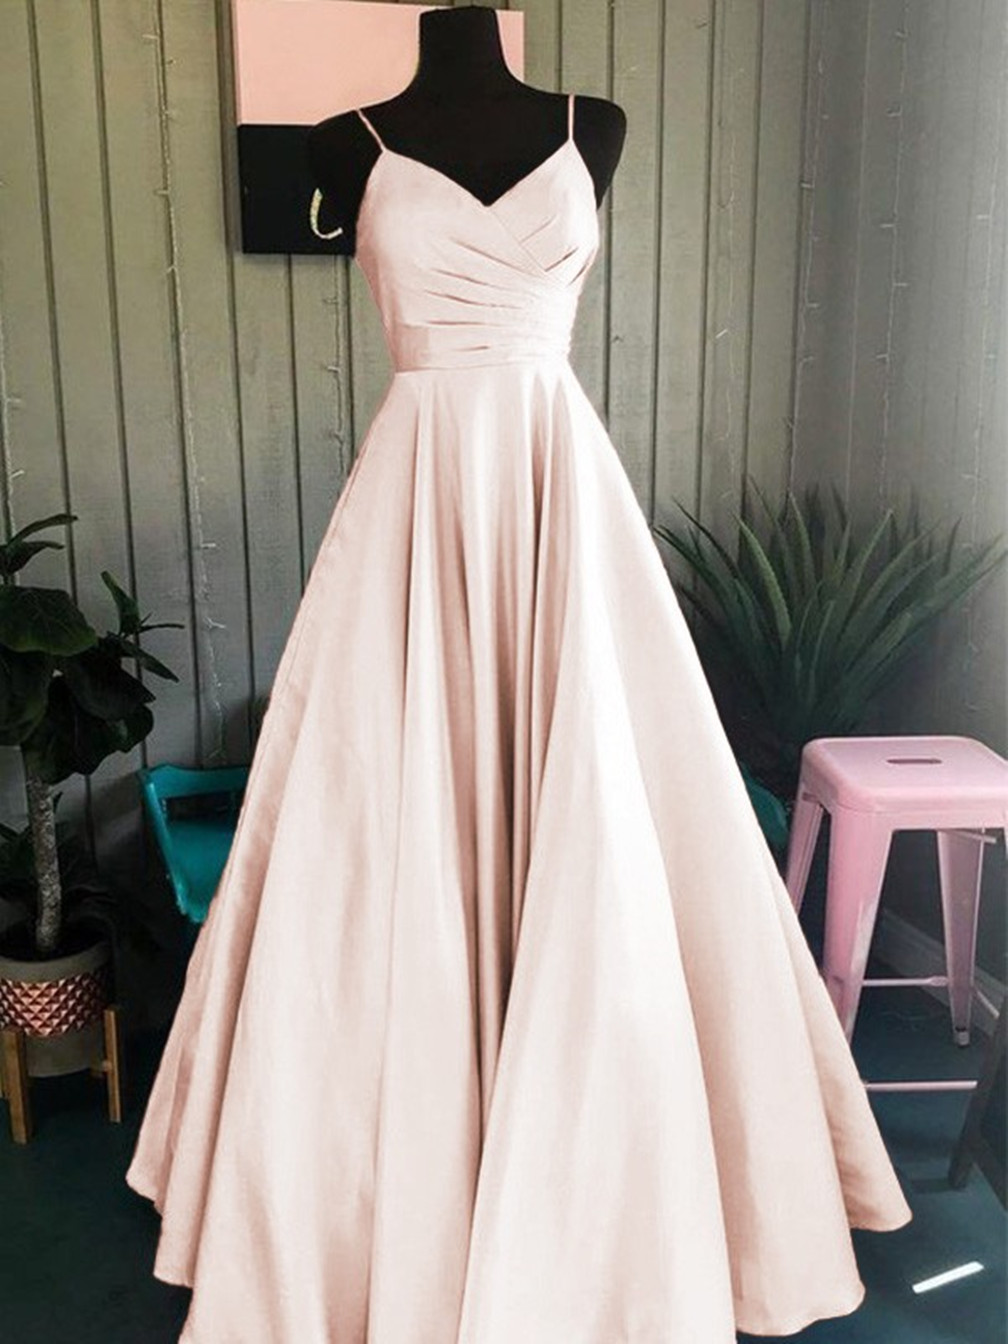 Women A-line/princess Satin Prom Dresses Long Spaghetti Straps Evening Party Gowns Sleeveless Formal Dress Yp084